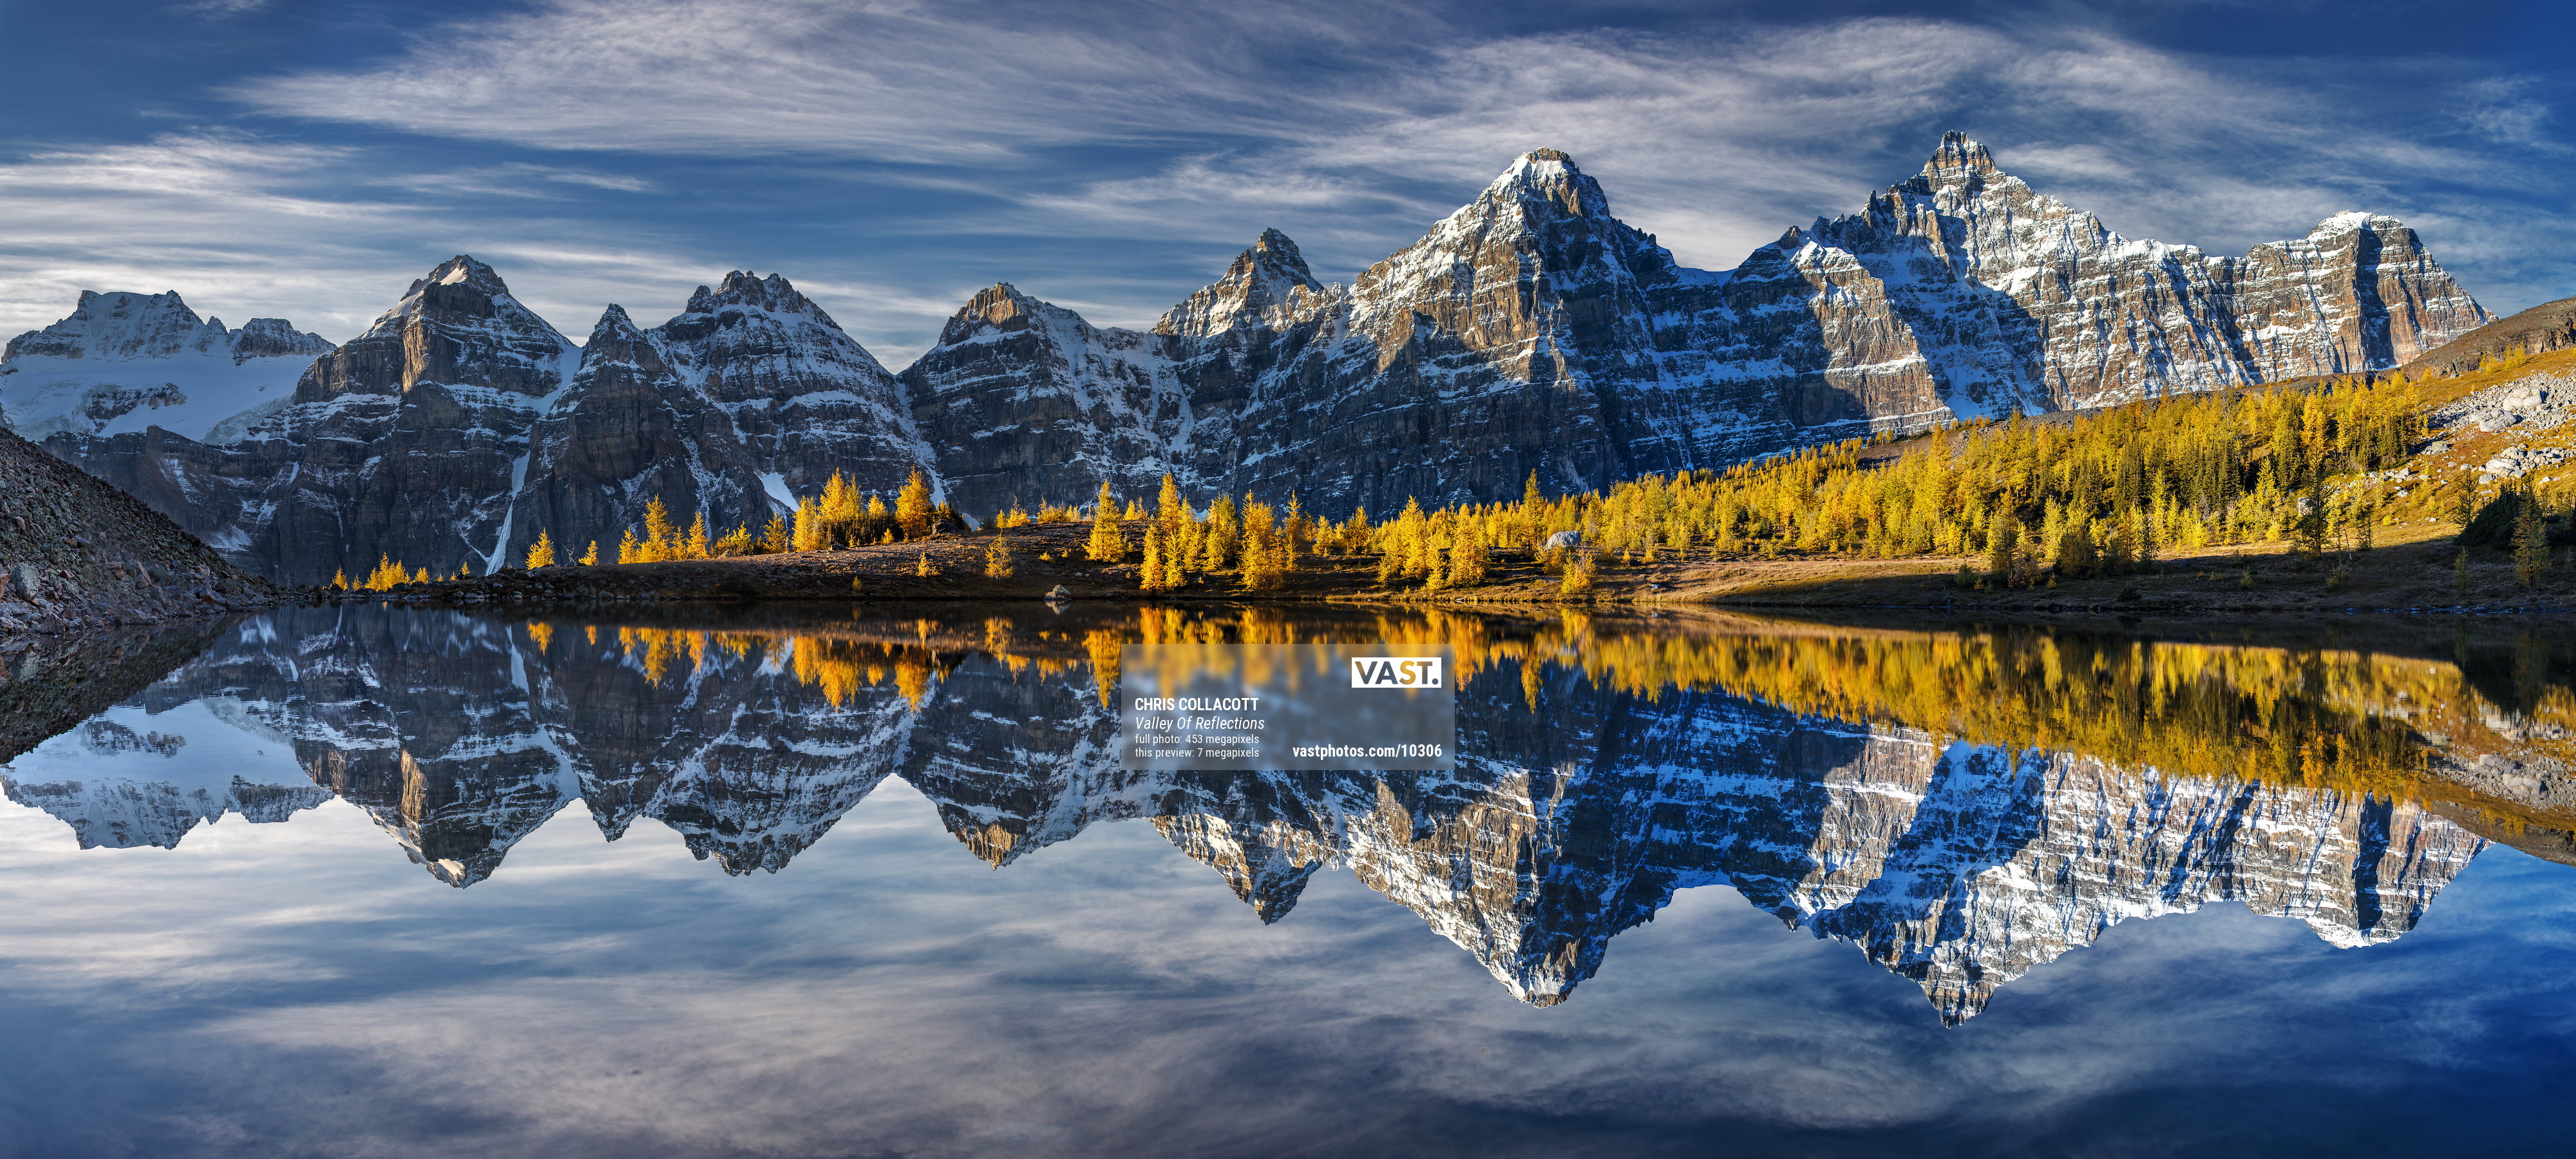 Mountains & Lakes: High Resolution Photos & Large-Format Prints - VAST